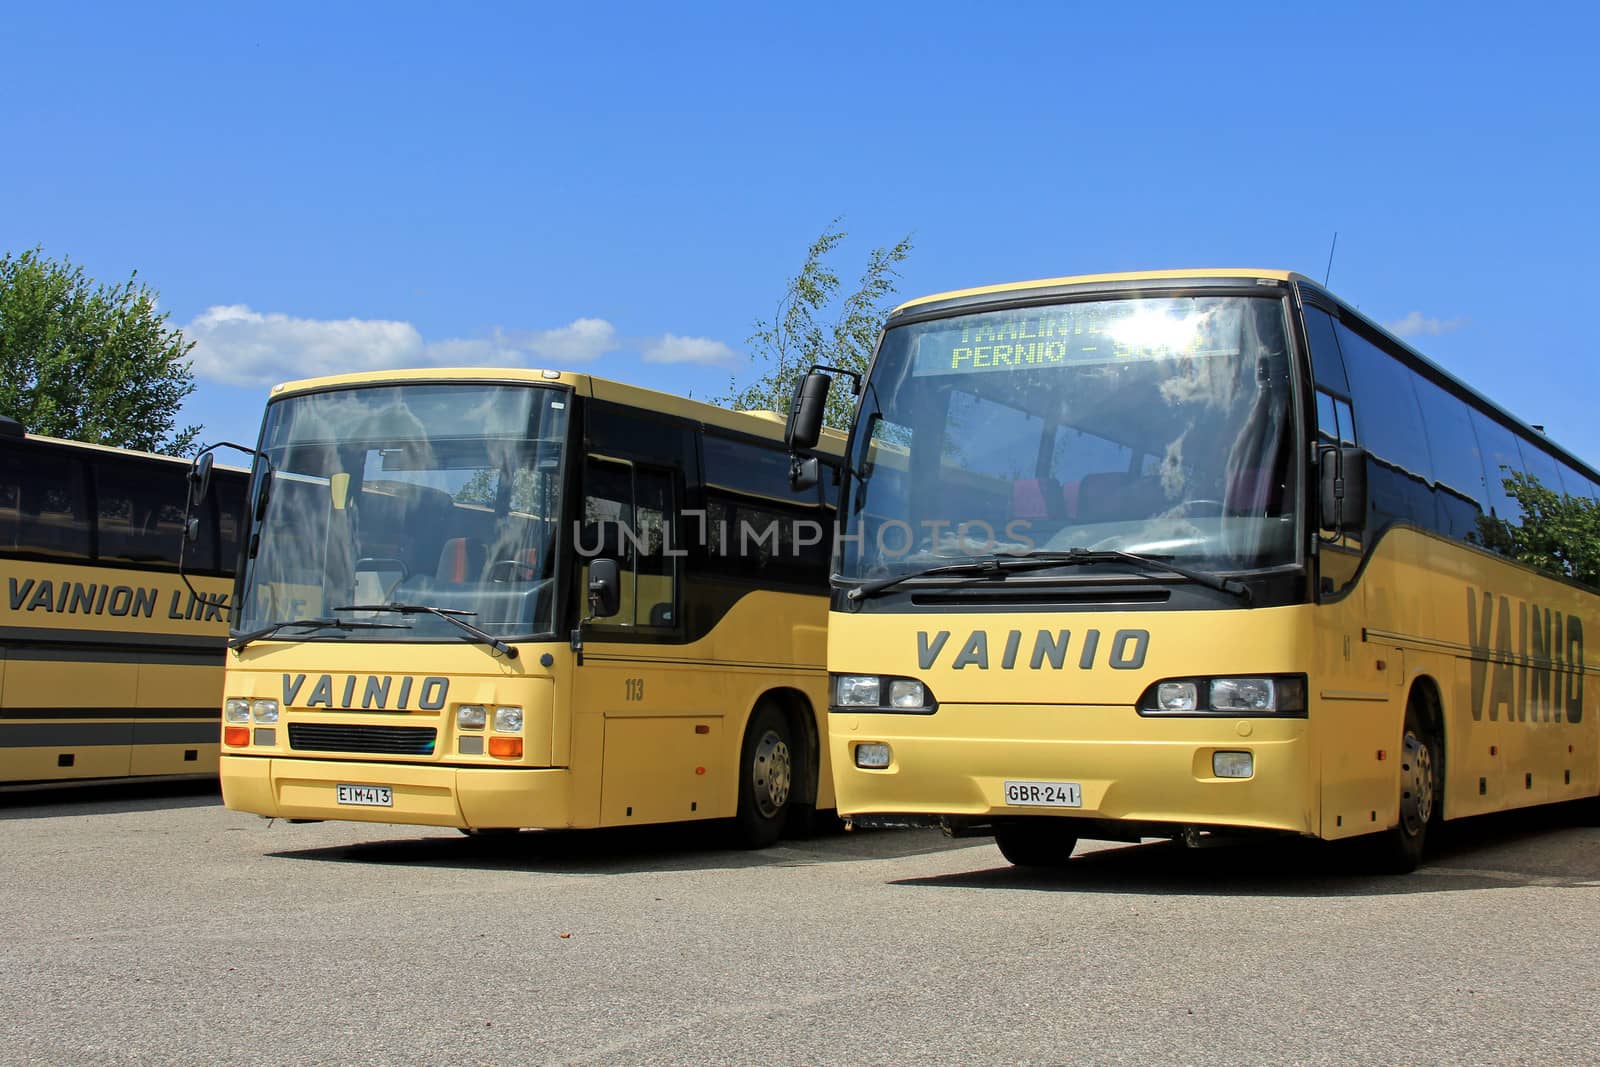 SALO, FINLAND - JULY 14, 2013: A row of Vainion Liikenne buses parked in Salo, Finland on July 14, 2013. Matti Vainio, CEO of Vainion Liikenne, continues the Chairman of Finnish Bus and Coach Association in 2013.